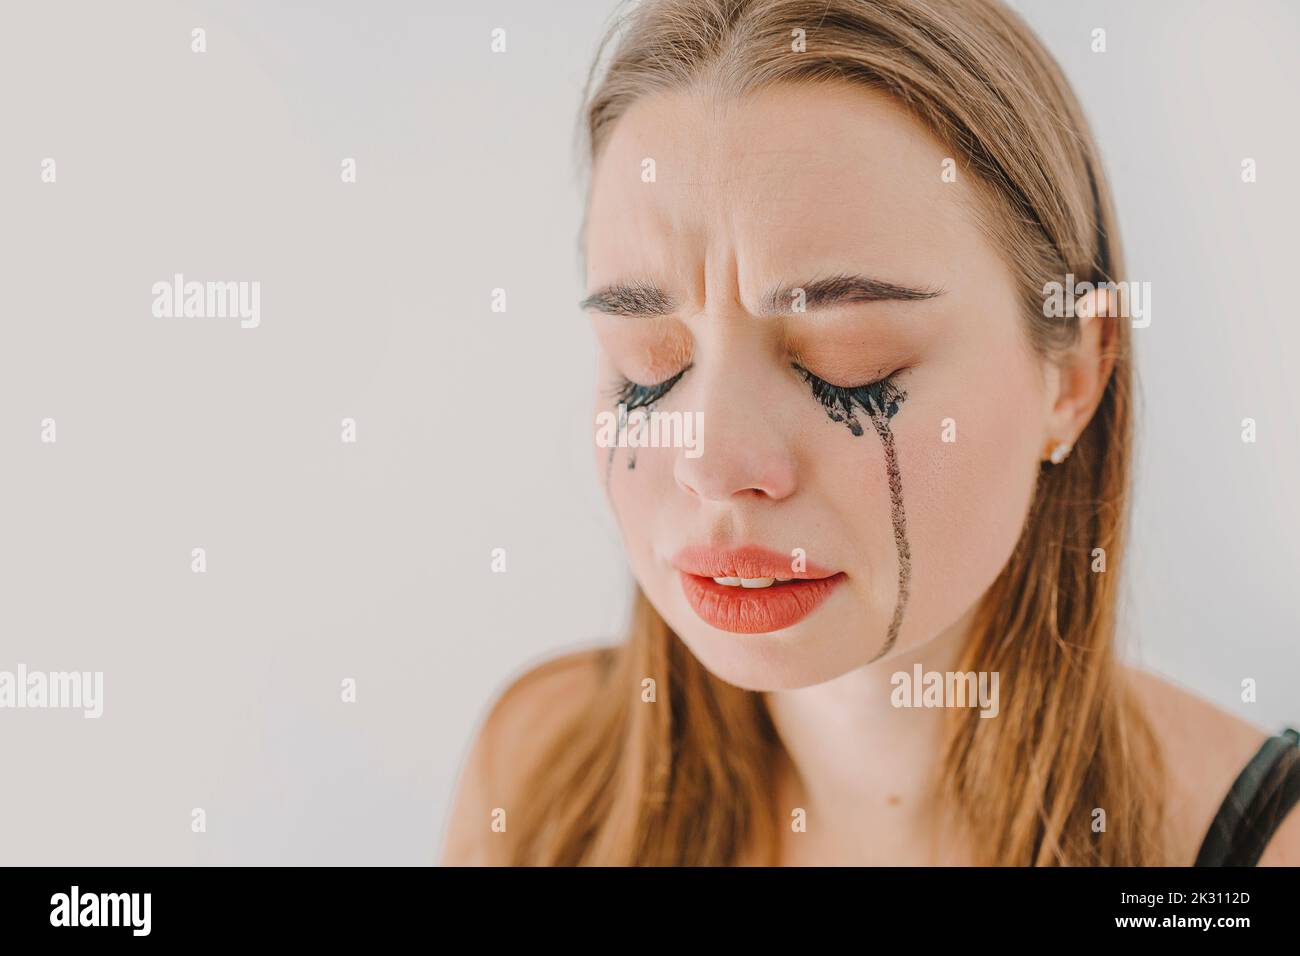 Sad young woman with smudged mascara crying in front of wall Stock Photo